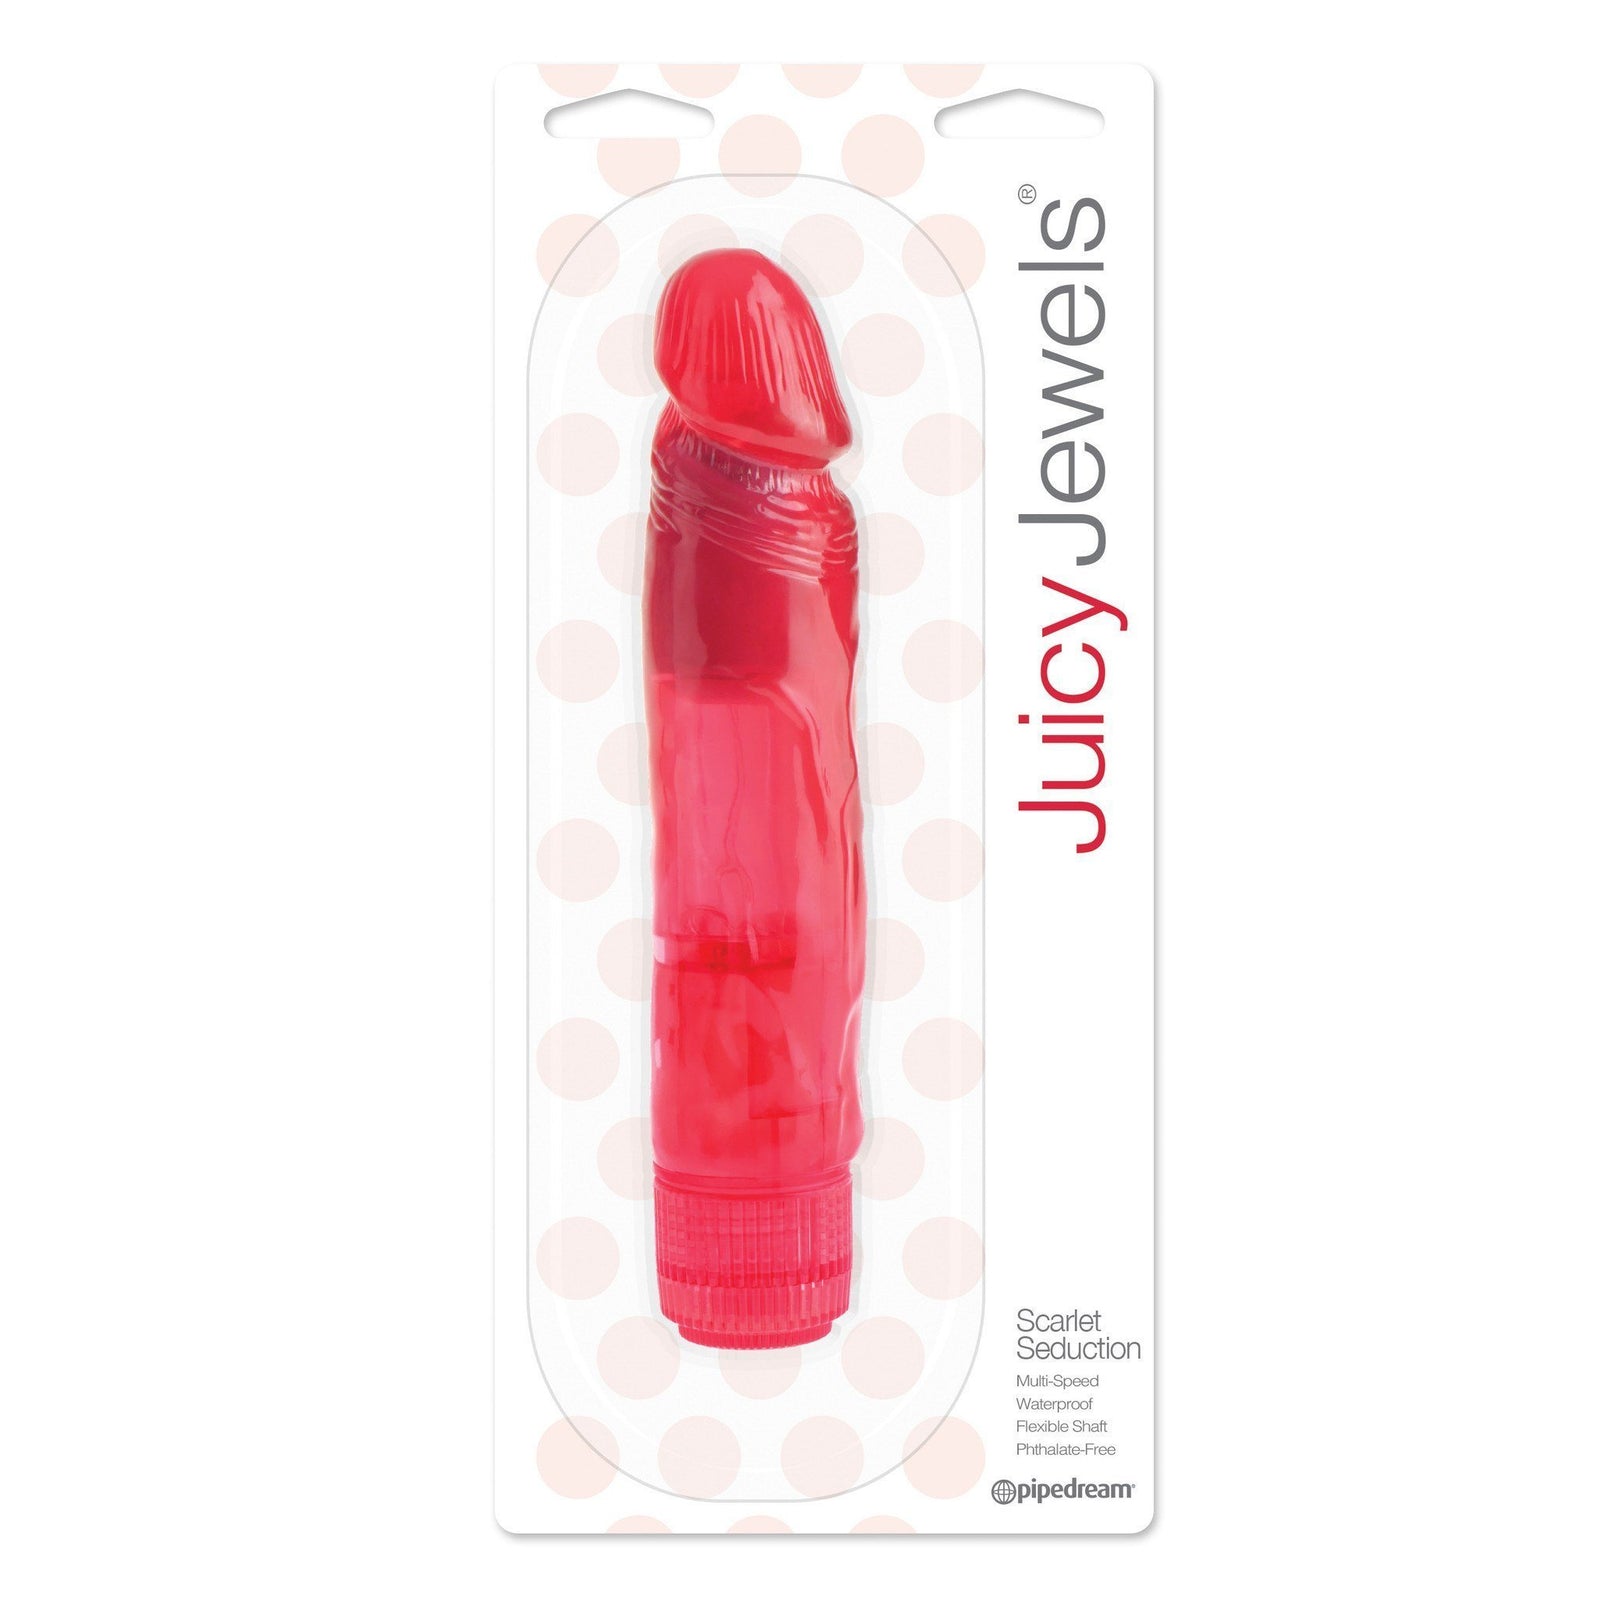 Pipedream - Juicy Jewels Scarlet Seduction (Red) Non Realistic Dildo w/o suction cup (Vibration) Non Rechargeable - CherryAffairs Singapore